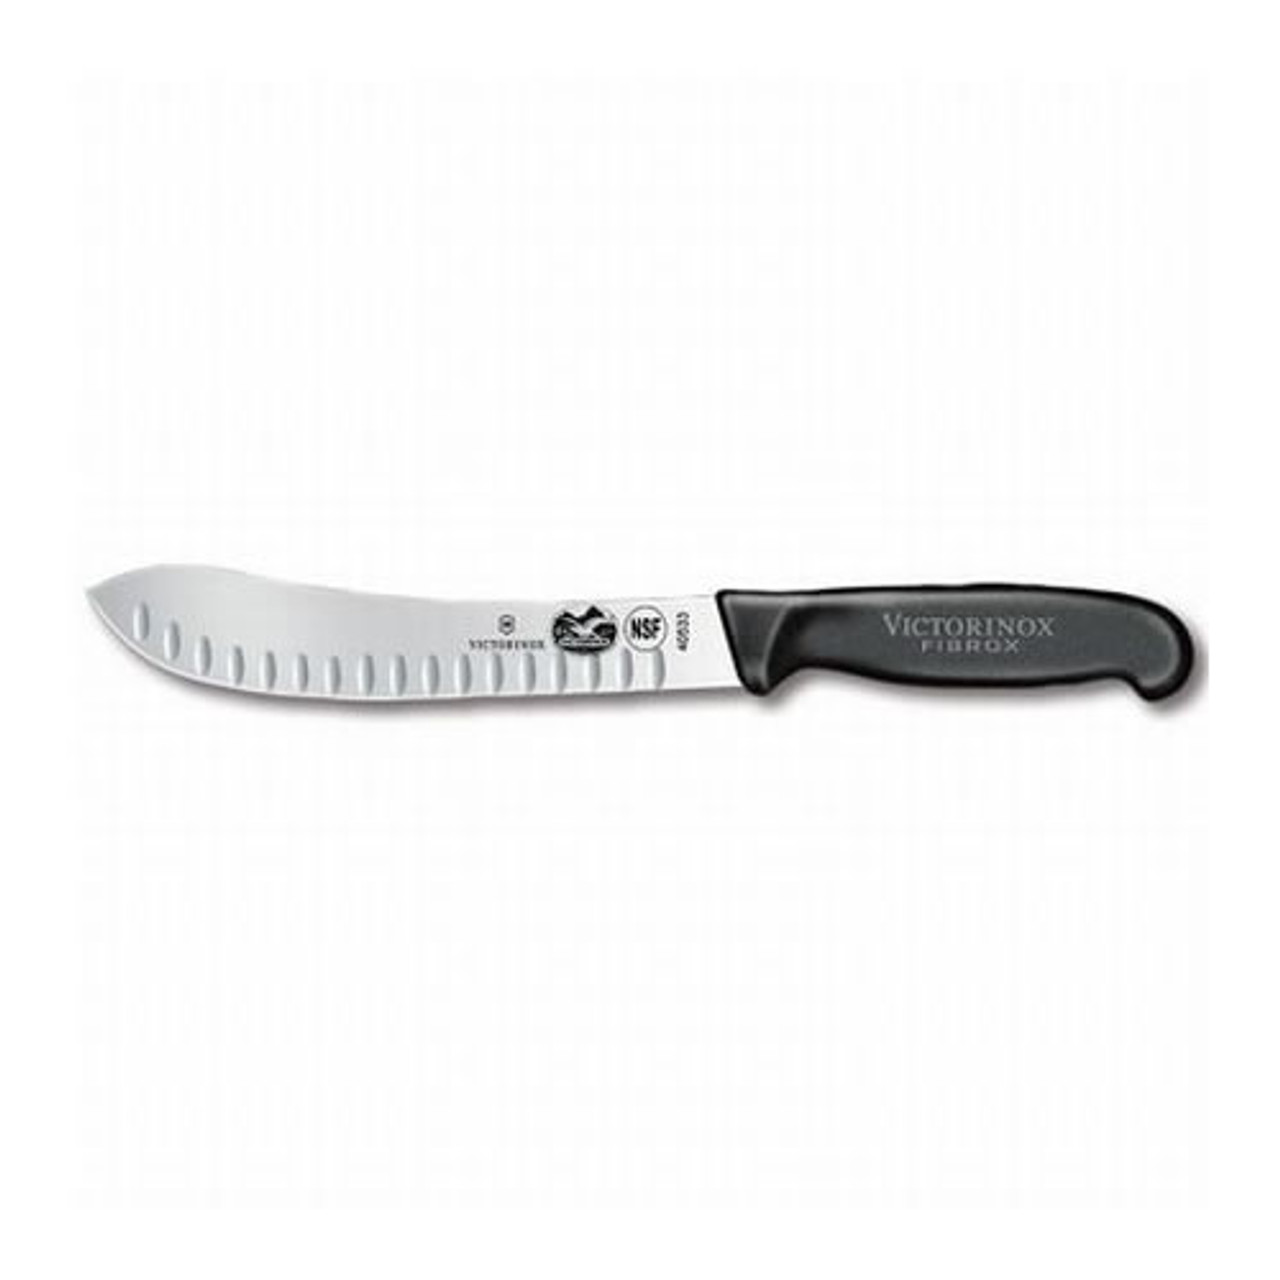 MeatProcessingProducts 2-Piece Butcher & Chef Knife Set, Model# 83-7004-W